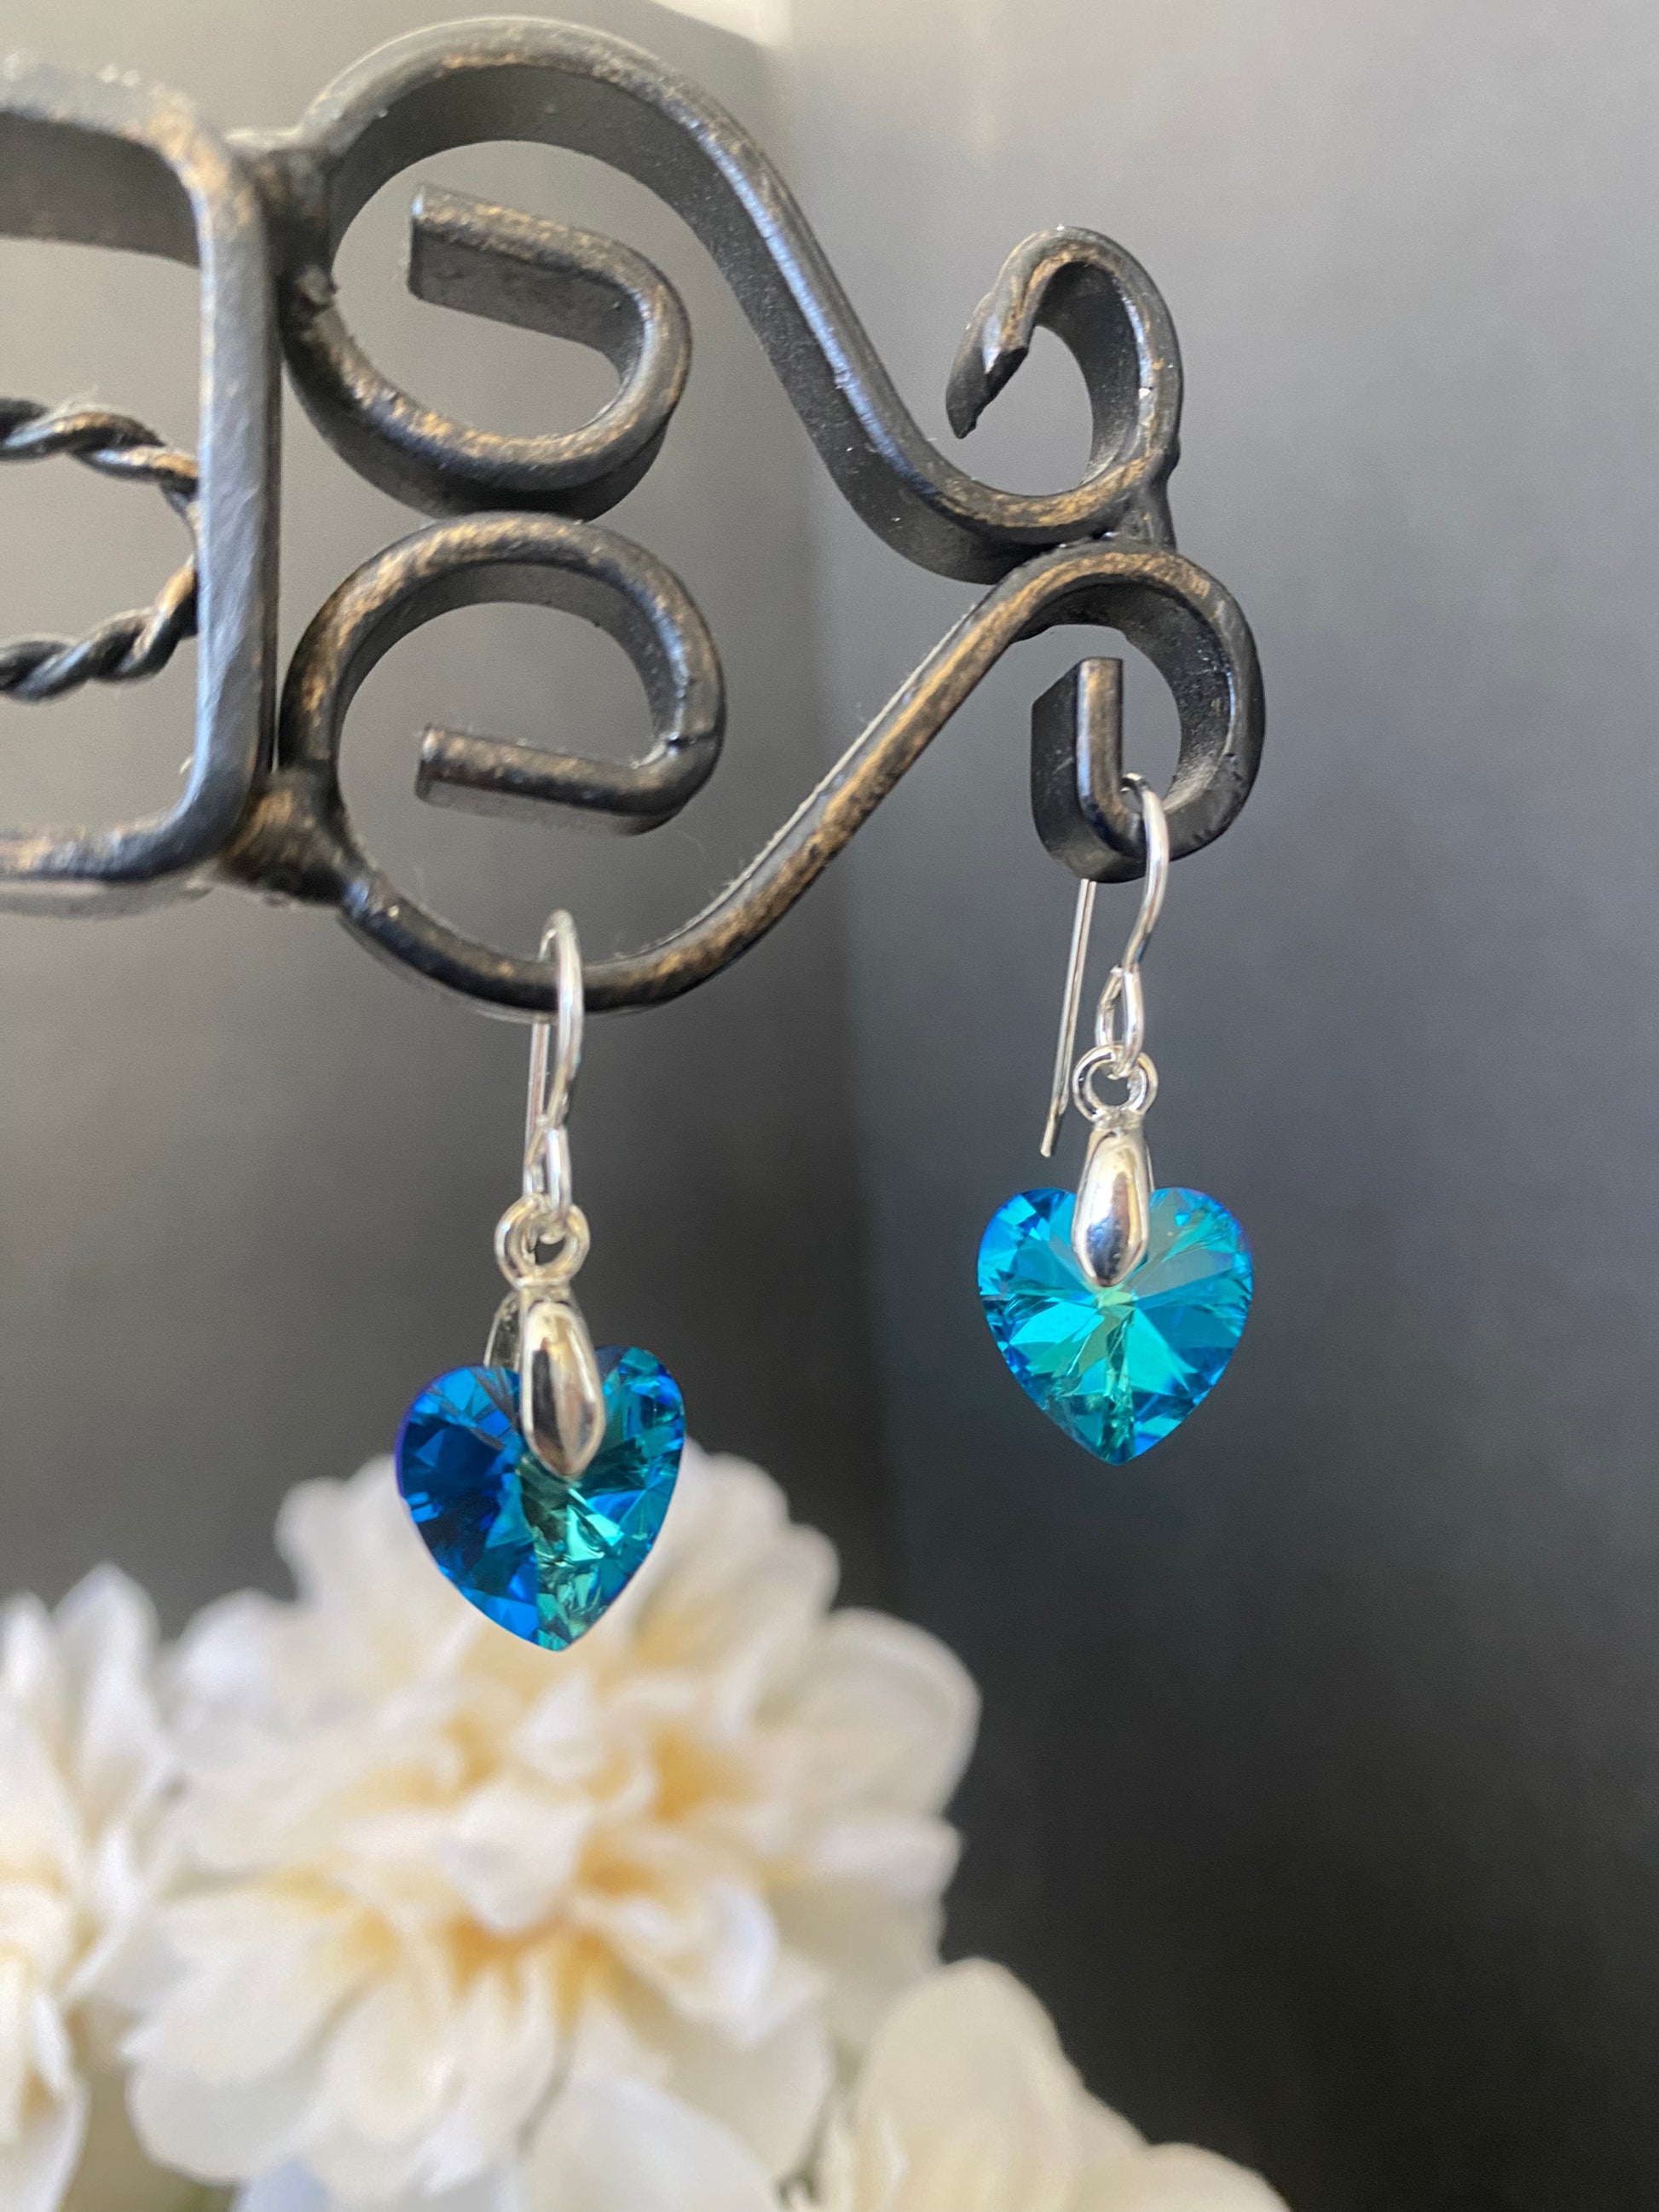 Blue crystal Silver heart charm and silver metal, earrings, jewelry. - Andria Bieber Designs 